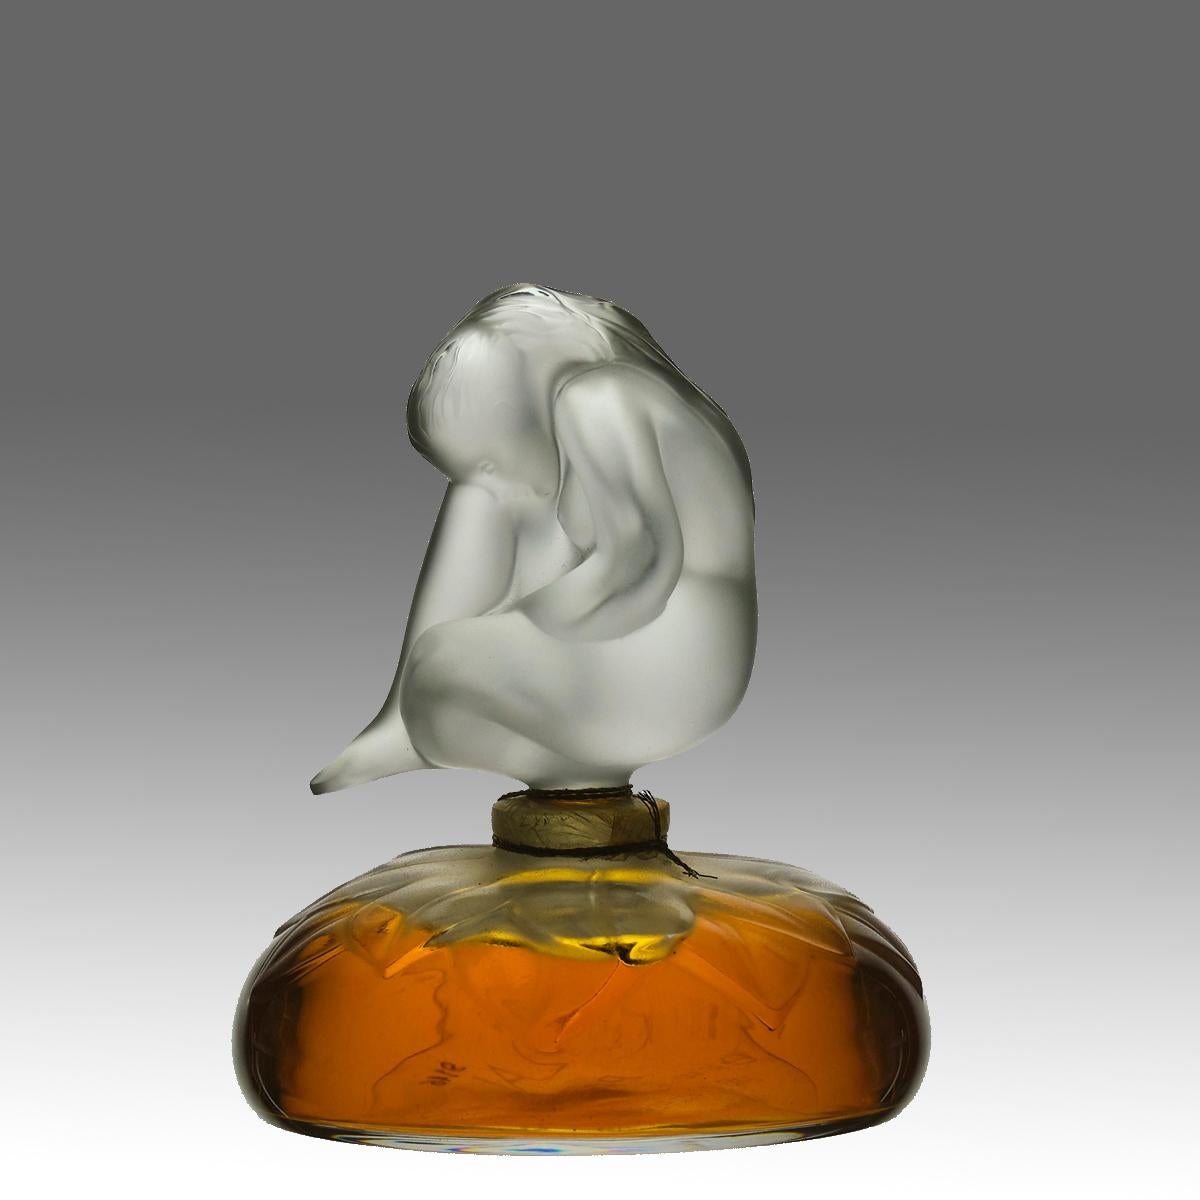 An excellent clear and frosted glass scent bottle by Lalique. The dome shape scent bottle etched with petals and full with original Lalique perfume with decorative stopper in the form of a seated woman with knee raised, signed Lalique France and